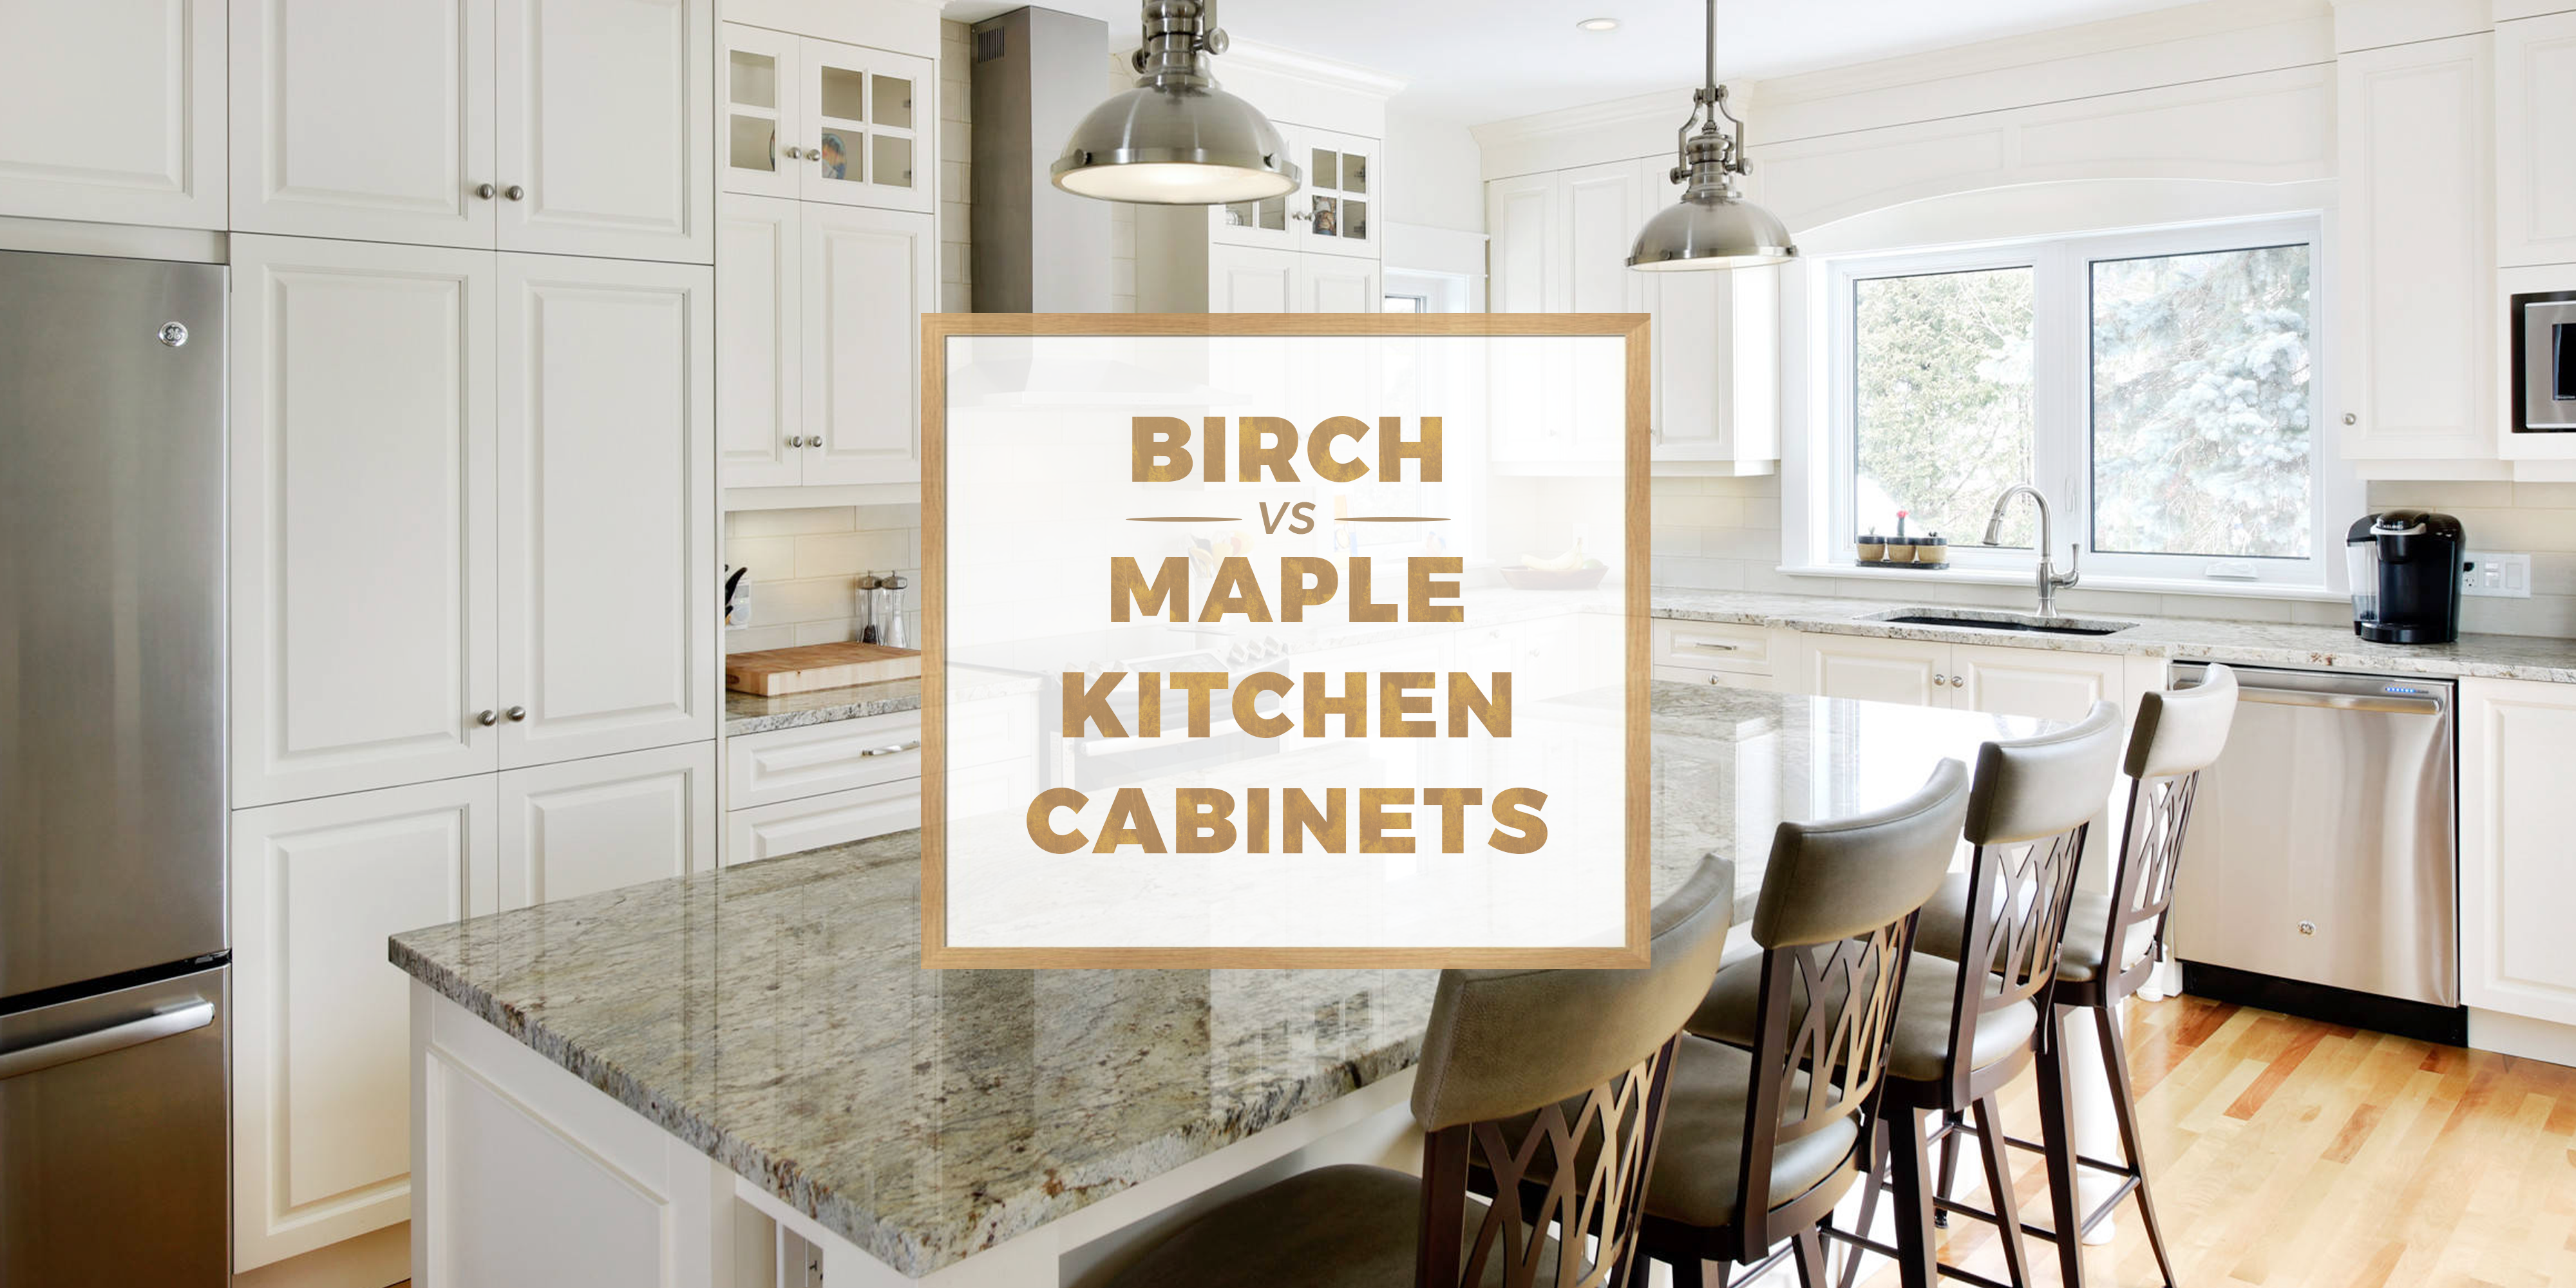 Birch Vs Maple Kitchen Cabinets, Birch Wood Cabinets Pros Cons